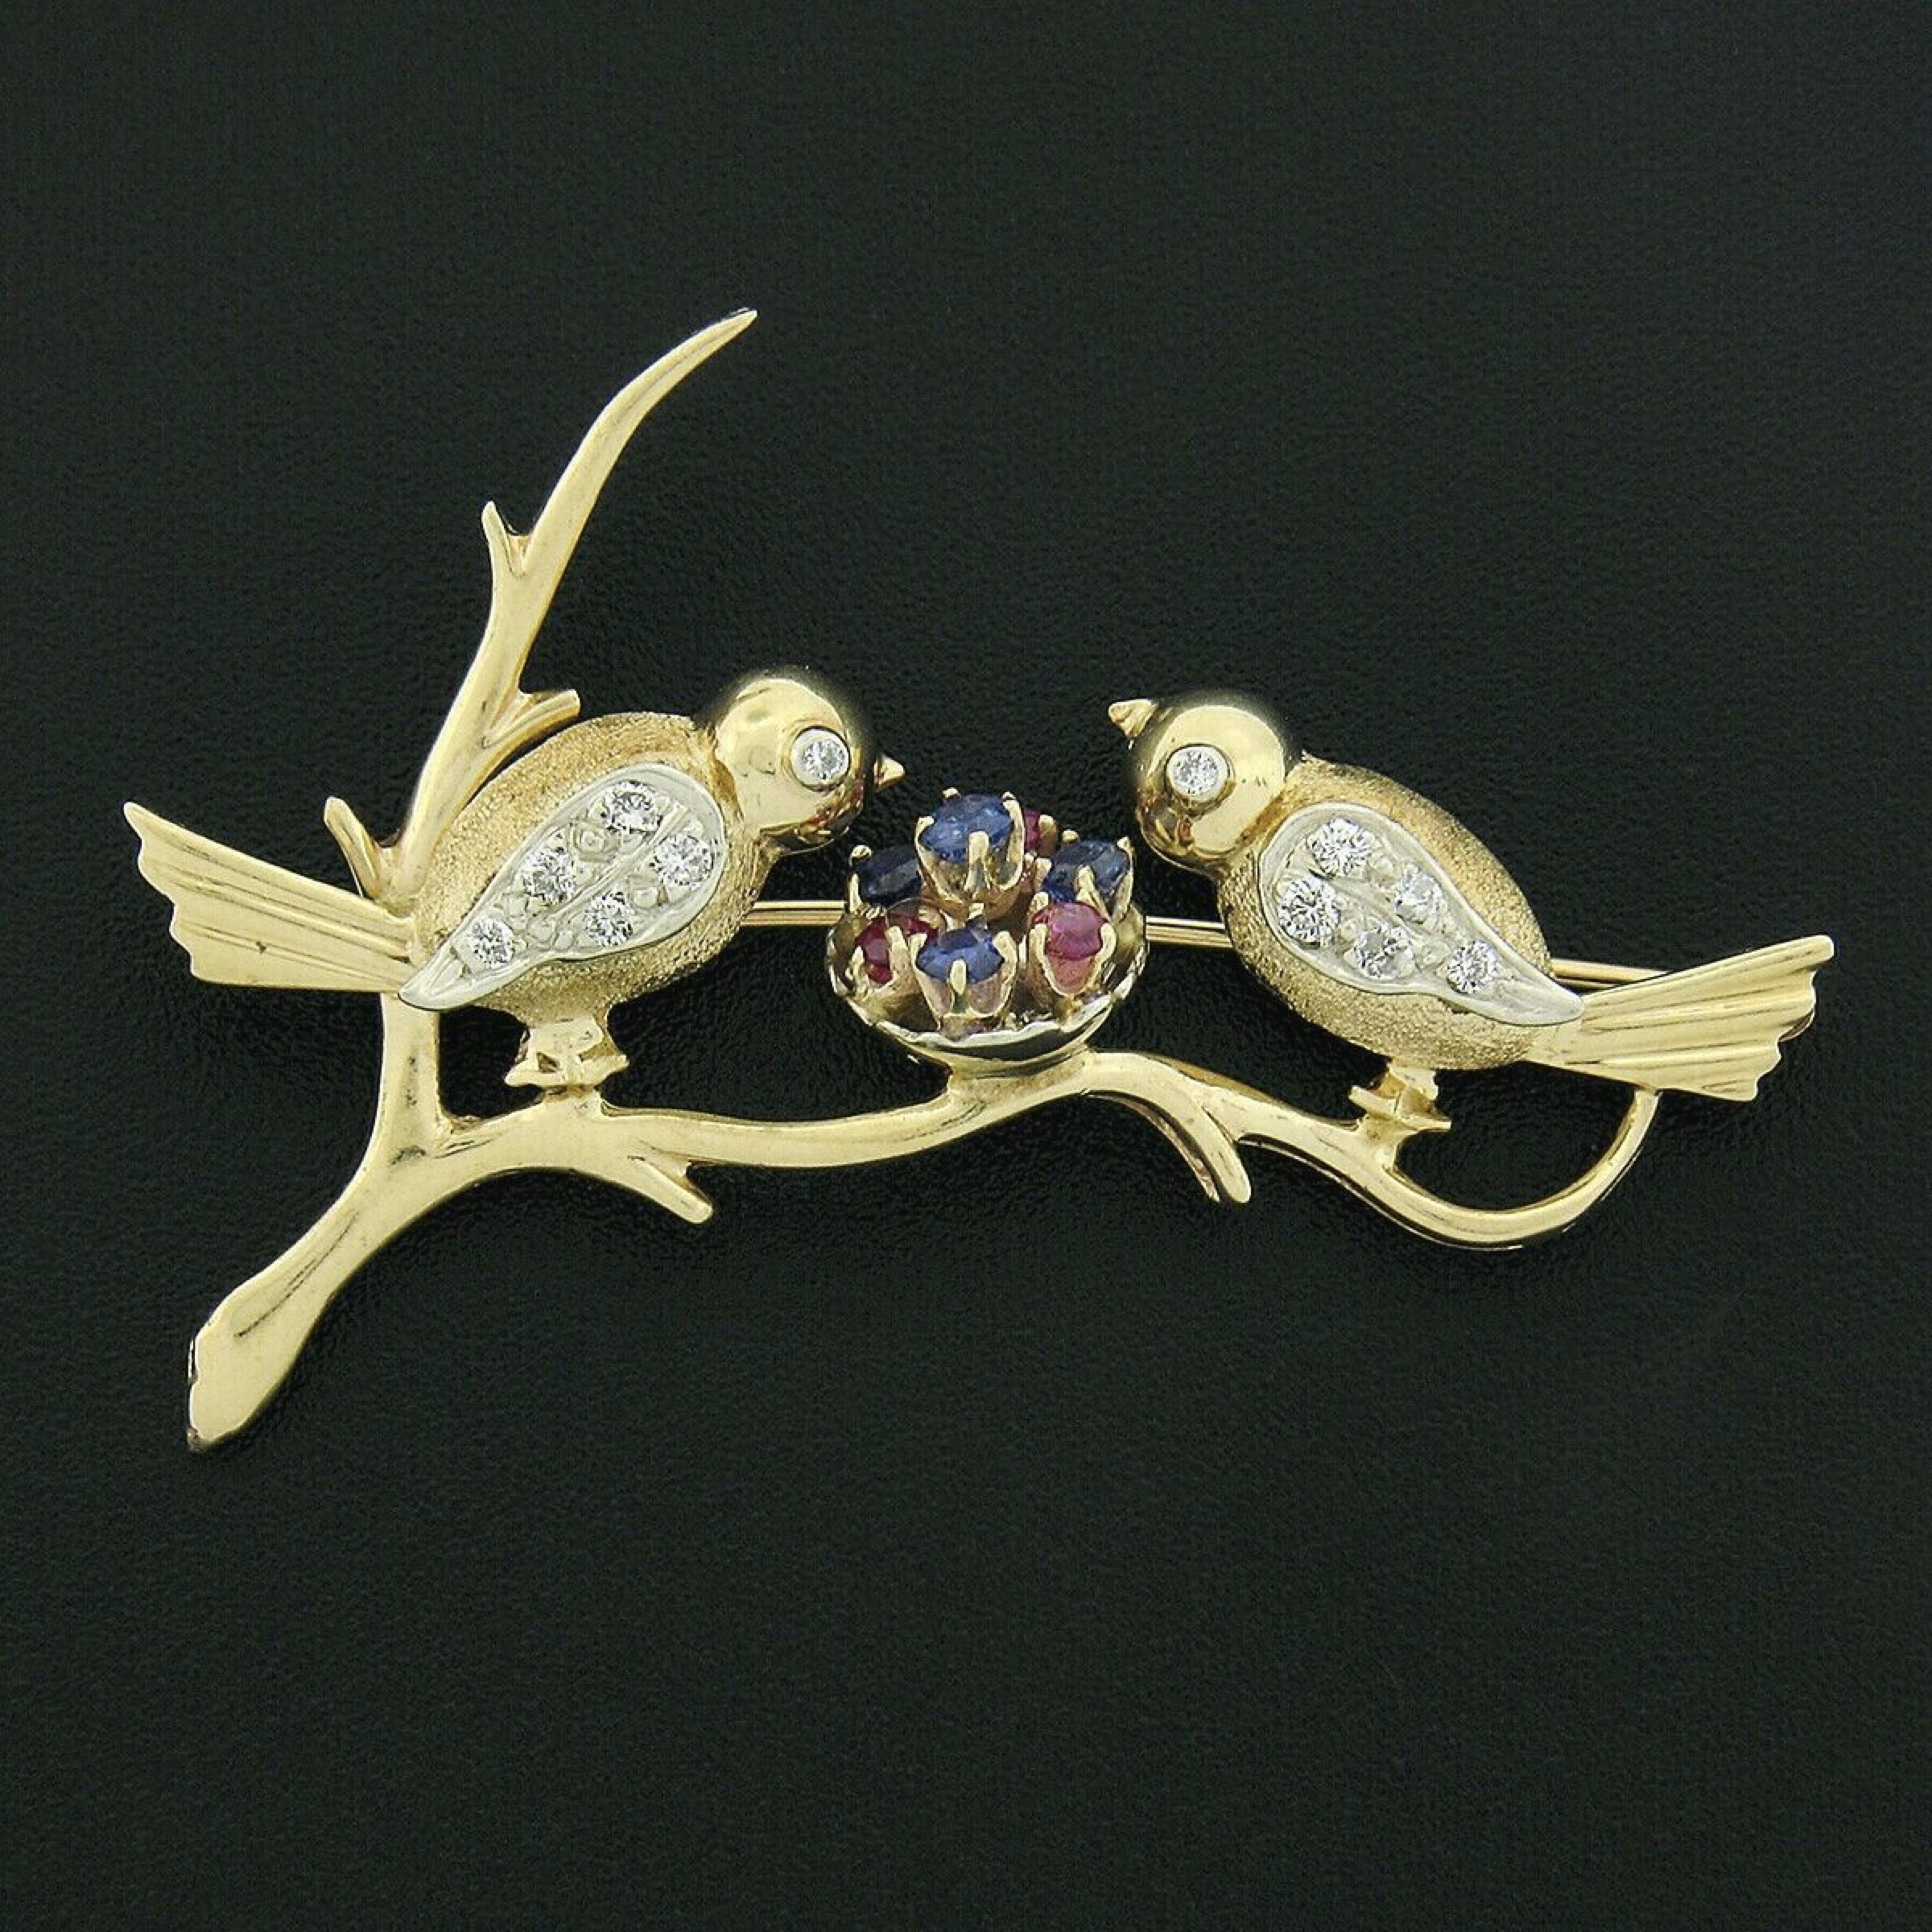 Here we have a gorgeous vintage brooch that is crafted from solid 14k yellow gold with white gold accents featuring a super sweet love birds design set with fine quality stones throughout. The two love birds are perched on a high-polished branch and